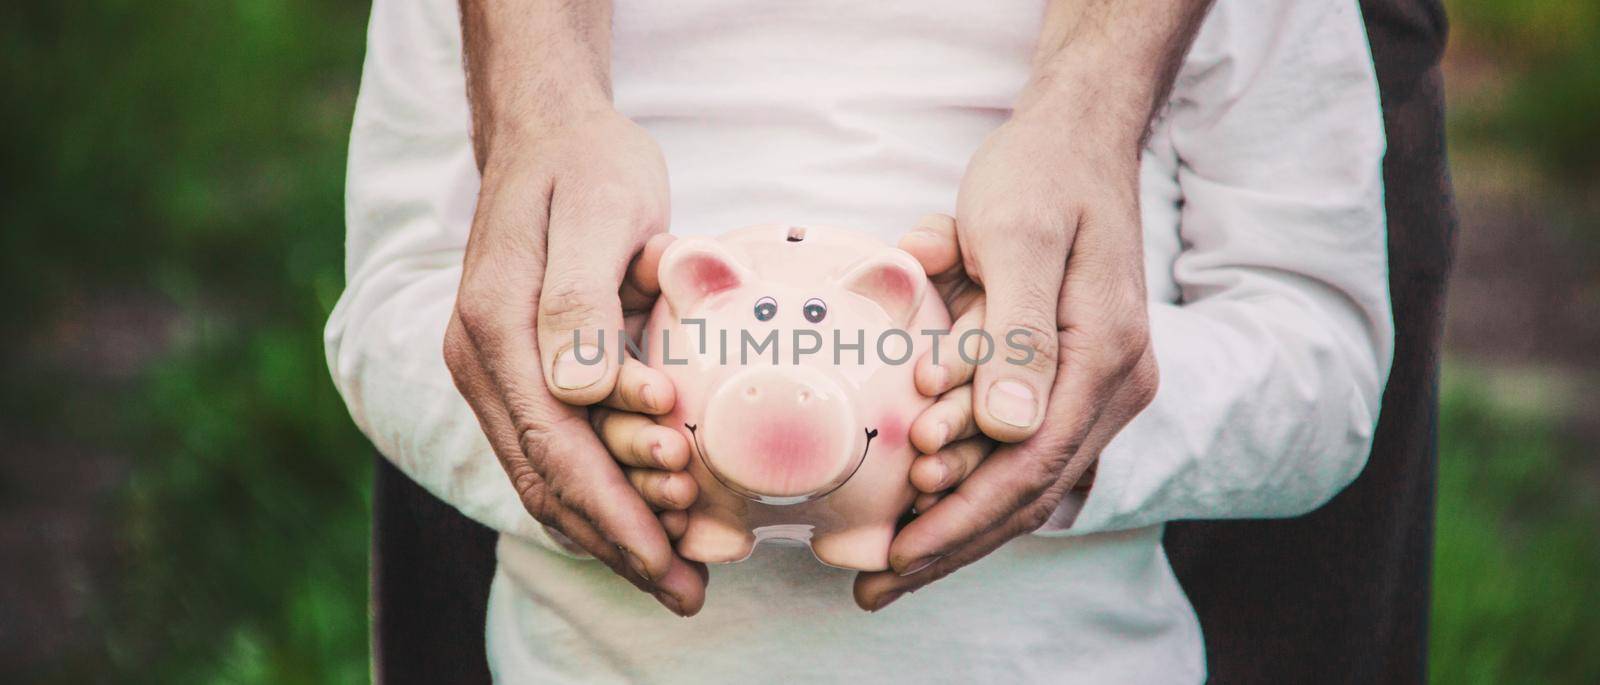 The child and parents are holding a piggy bank in their hands.